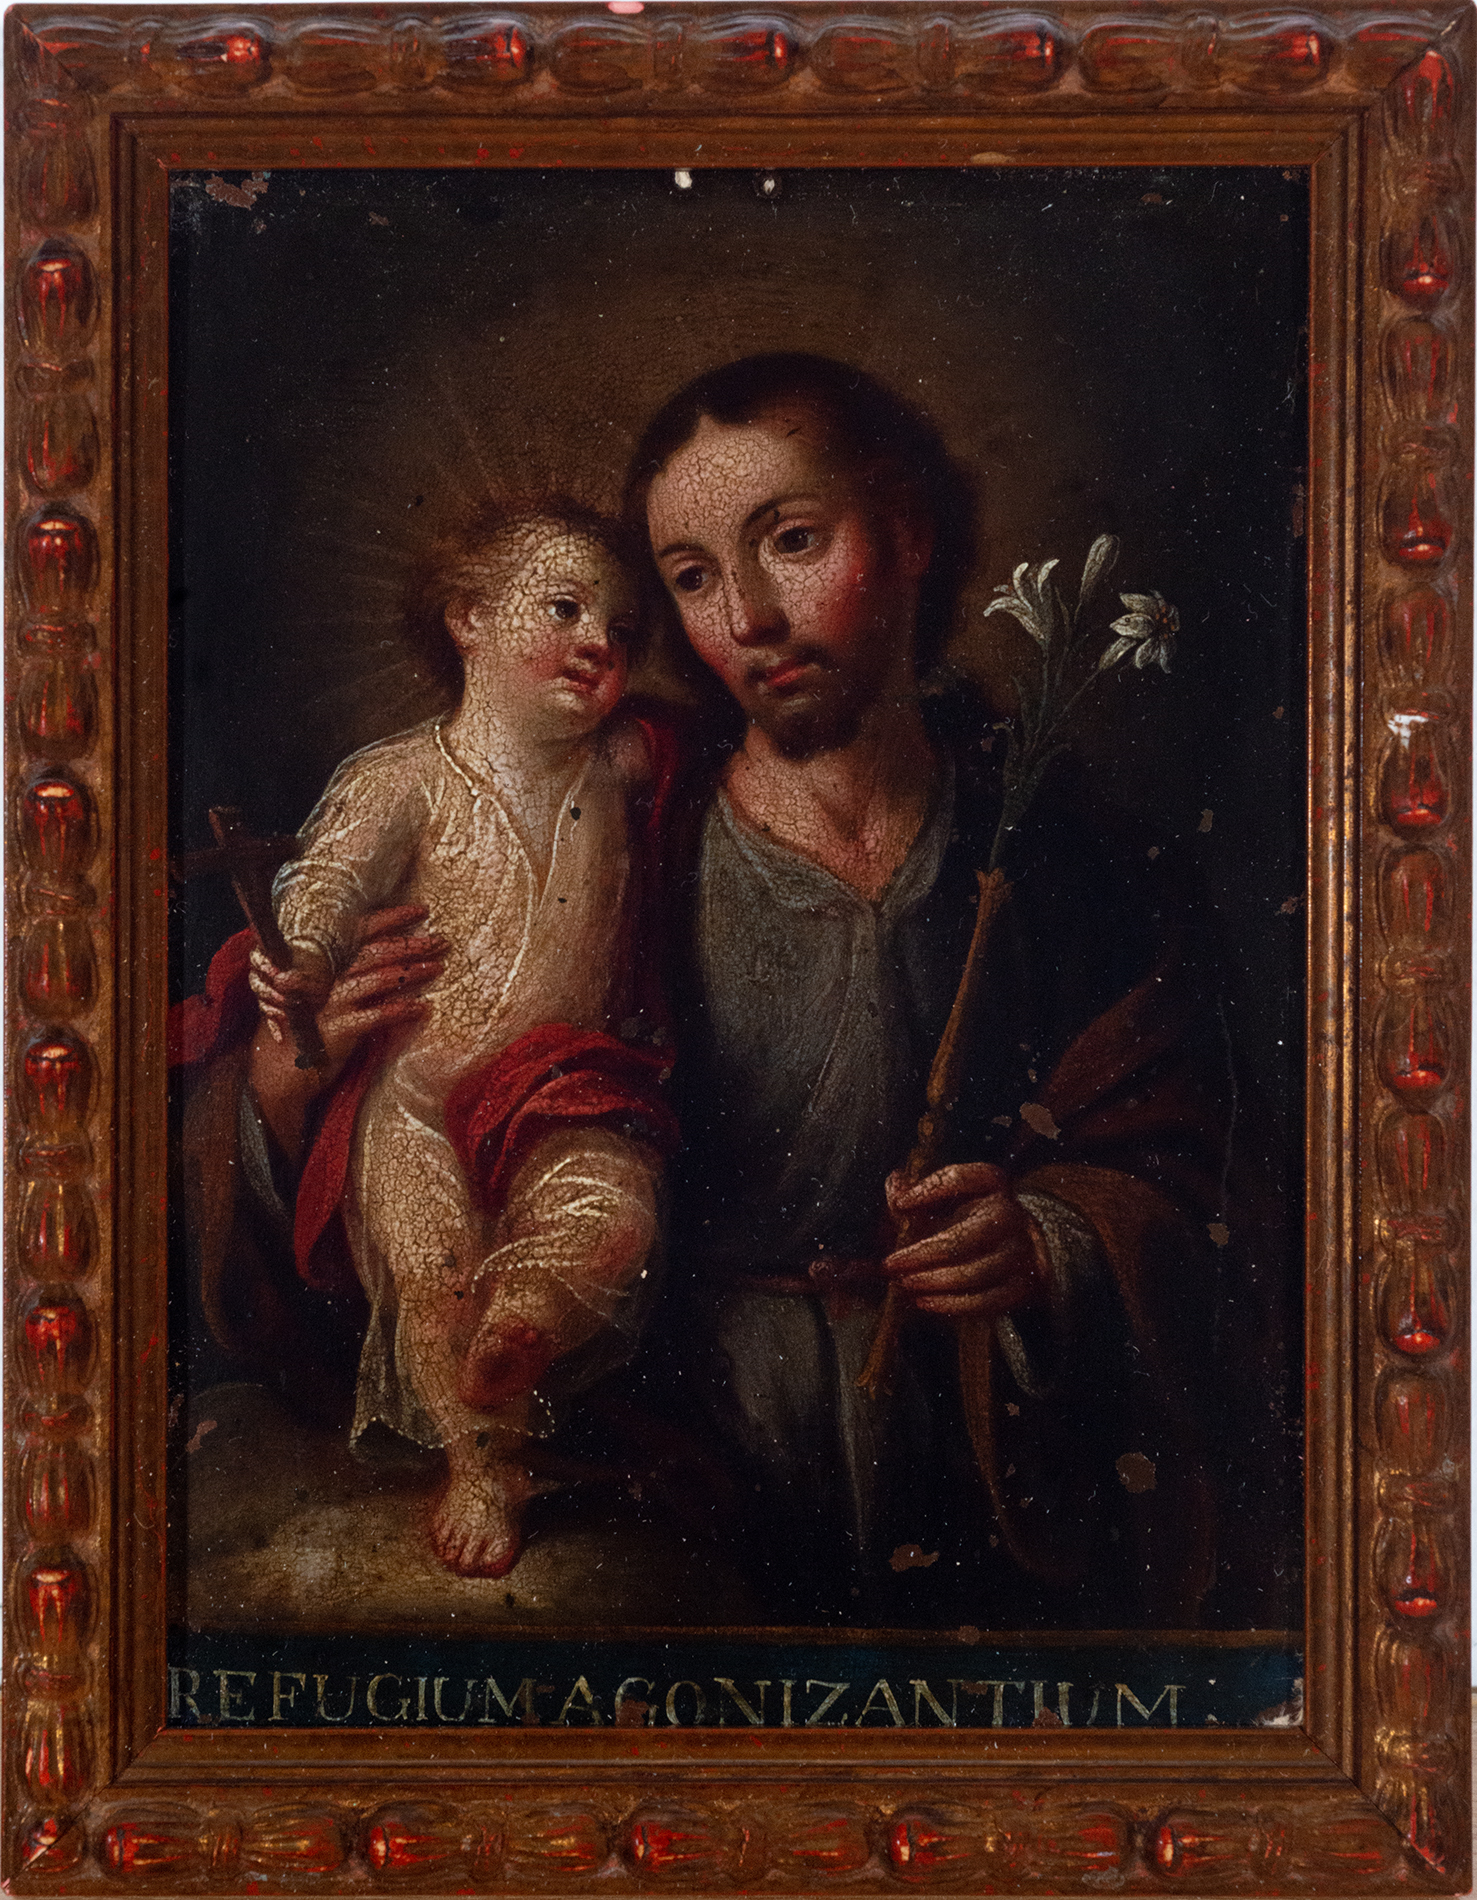 Exceptional Copper of Saint Joseph with Enfant Jesus, 18th century New Spanish colonial school, in t - Image 2 of 5